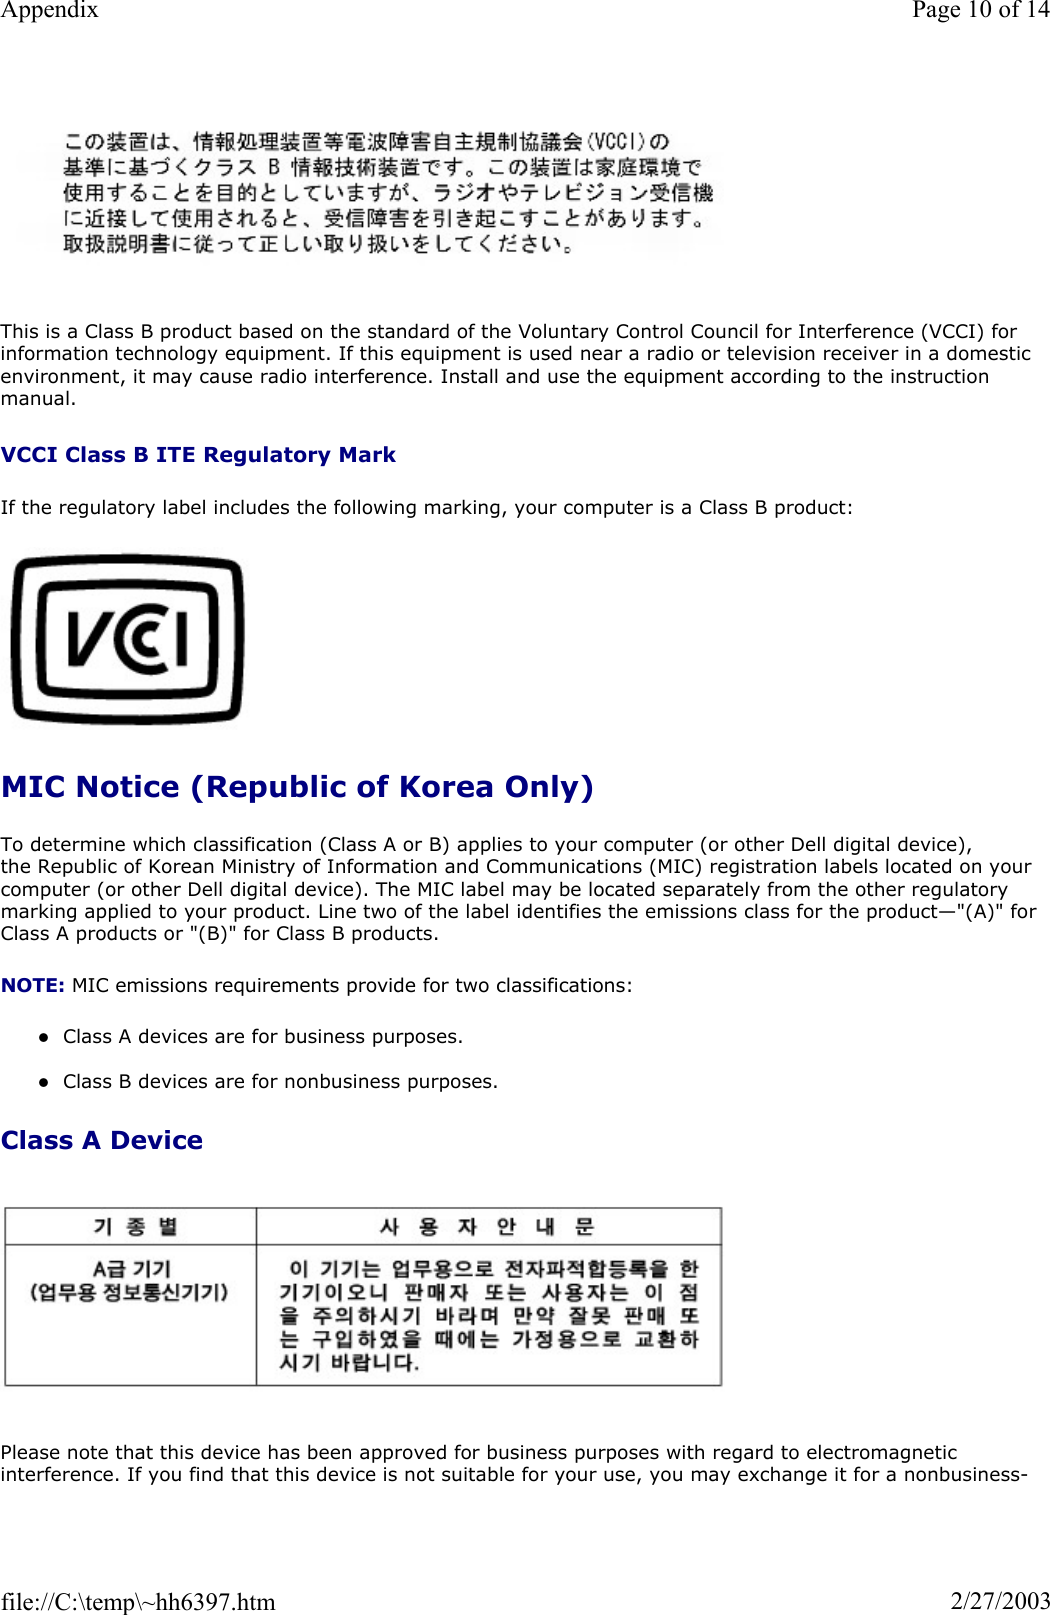 This is a Class B product based on the standard of the Voluntary Control Council for Interference (VCCI) for information technology equipment. If this equipment is used near a radio or television receiver in a domestic environment, it may cause radio interference. Install and use the equipment according to the instruction manual. VCCI Class B ITE Regulatory Mark If the regulatory label includes the following marking, your computer is a Class B product: MIC Notice (Republic of Korea Only) To determine which classification (Class A or B) applies to your computer (or other Dell digital device), the Republic of Korean Ministry of Information and Communications (MIC) registration labels located on your computer (or other Dell digital device). The MIC label may be located separately from the other regulatory marking applied to your product. Line two of the label identifies the emissions class for the product—&quot;(A)&quot; for Class A products or &quot;(B)&quot; for Class B products. NOTE: MIC emissions requirements provide for two classifications: zClass A devices are for business purposes. zClass B devices are for nonbusiness purposes. Class A Device Please note that this device has been approved for business purposes with regard to electromagnetic interference. If you find that this device is not suitable for your use, you may exchange it for a nonbusiness-Page 10 of 14Appendix2/27/2003file://C:\temp\~hh6397.htm